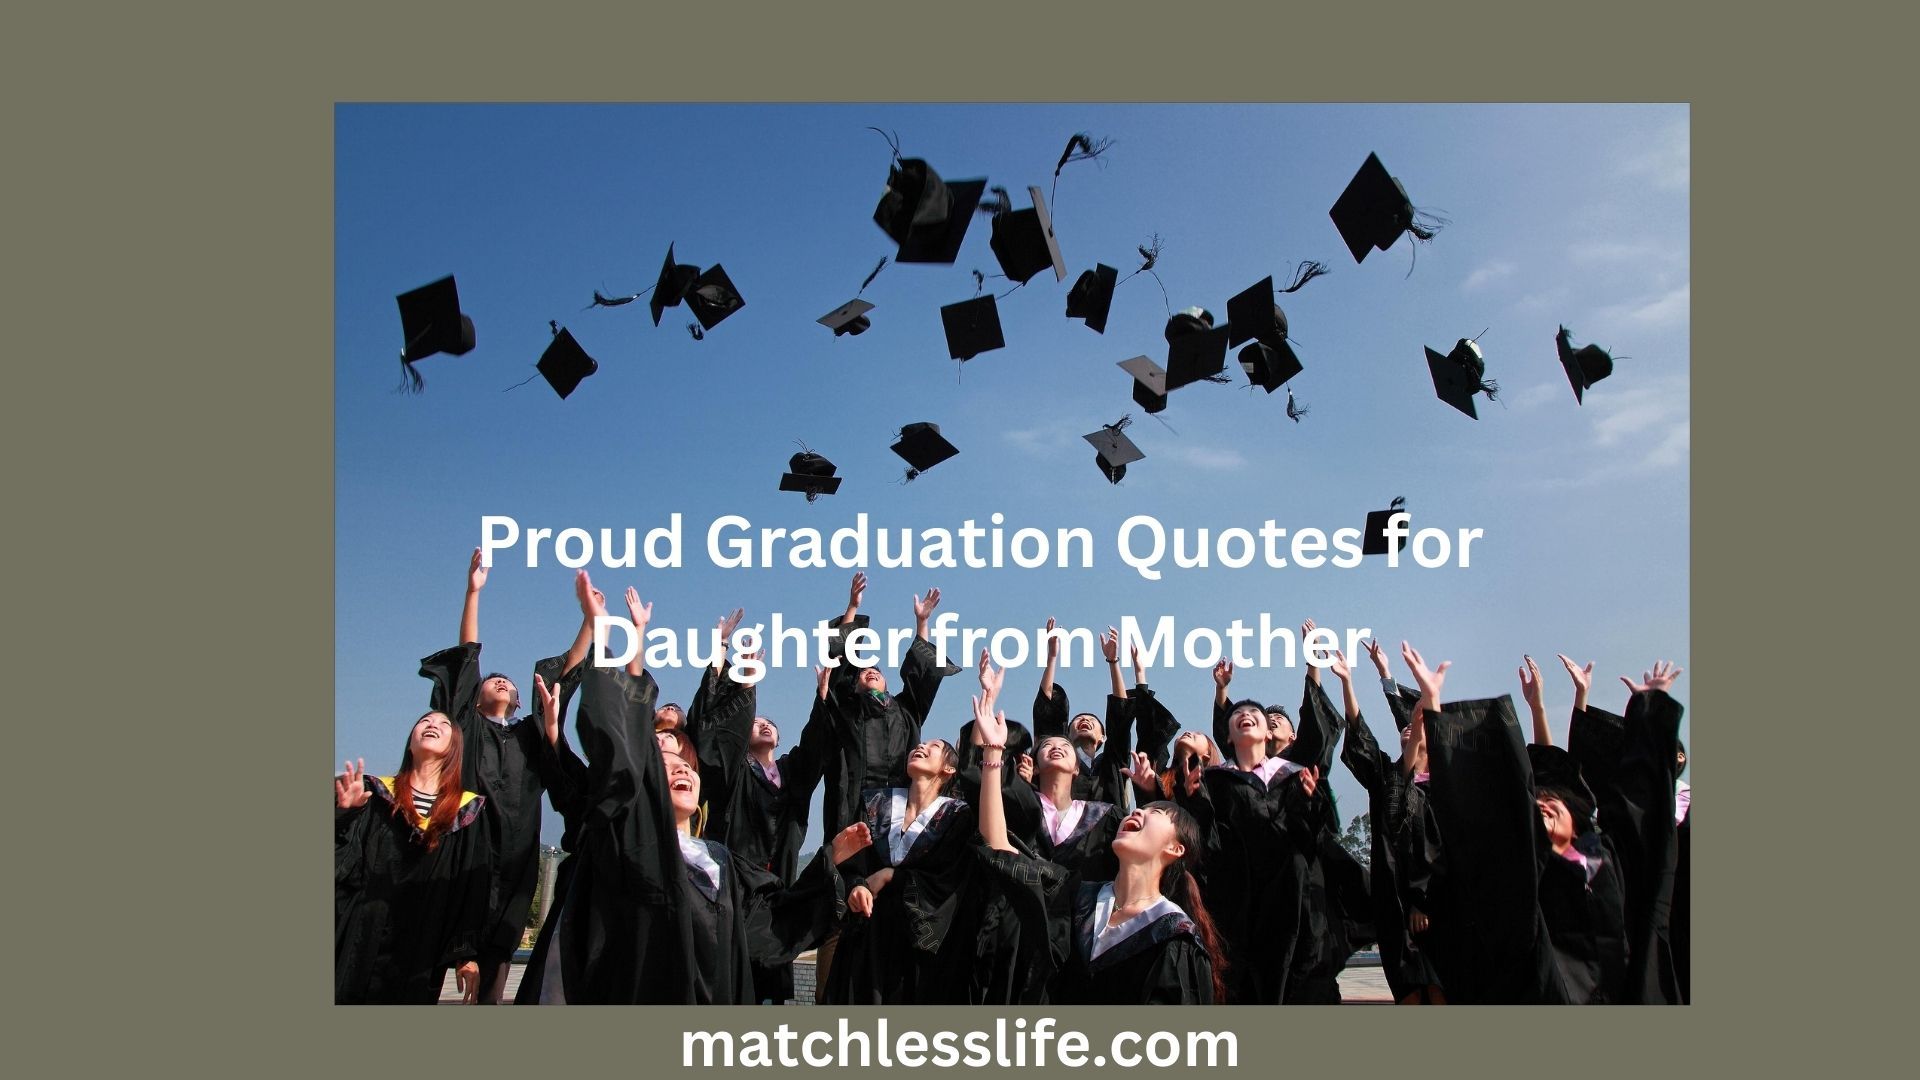 Proud Graduation Quotes for Daughter from Mother